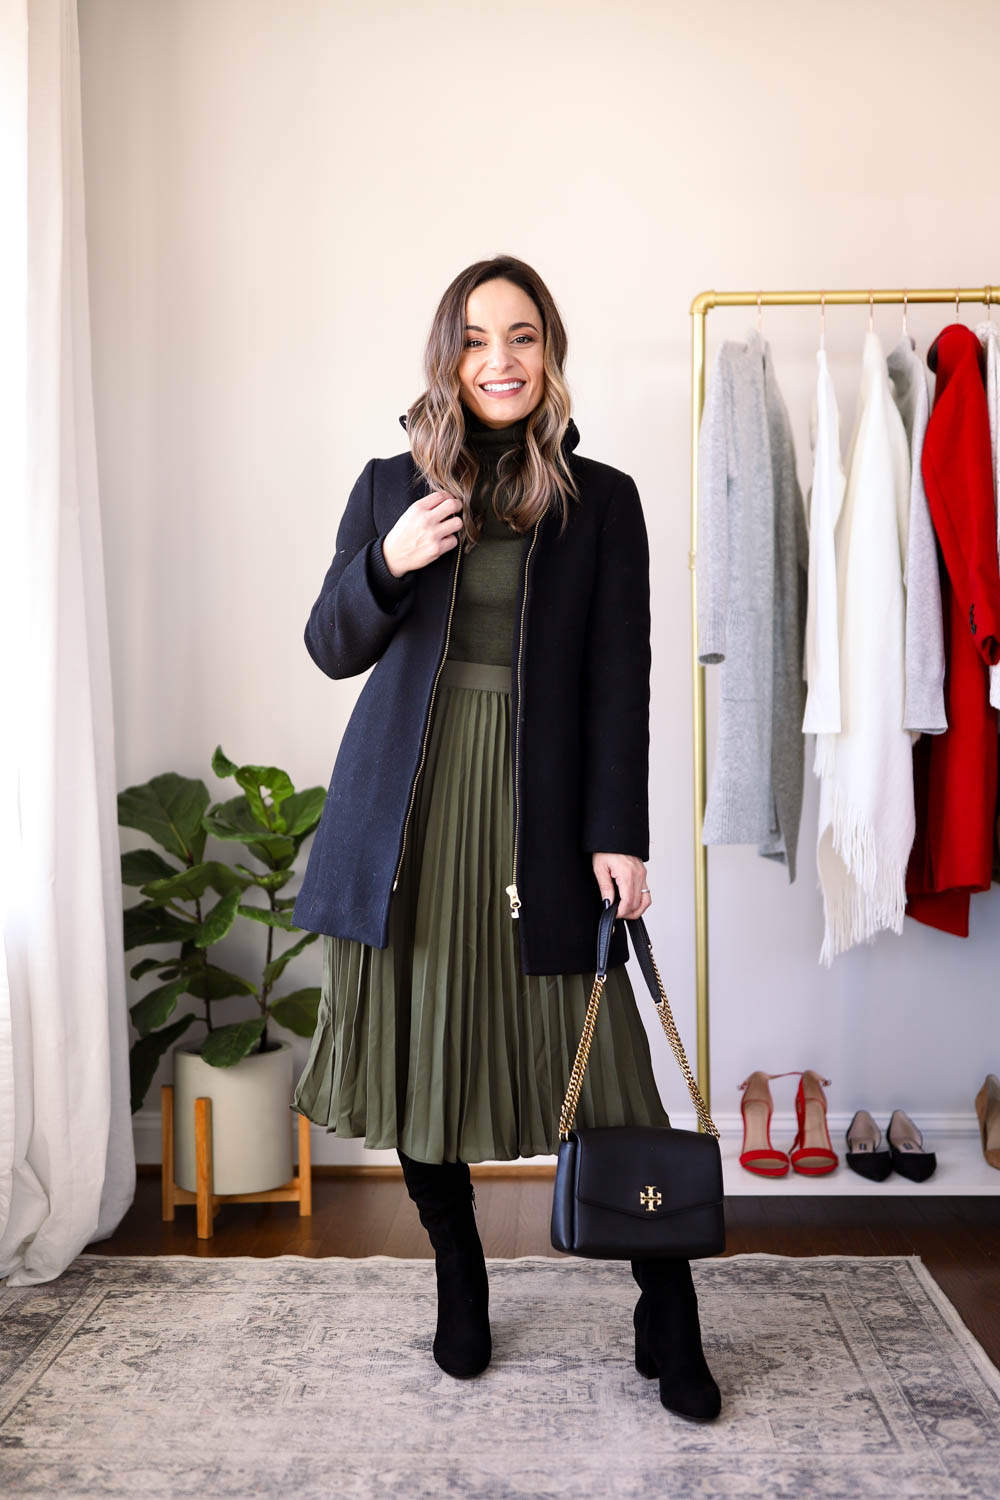 Casual Dress with Tights Smart Casual Winter Outfits (2 ideas & outfits)